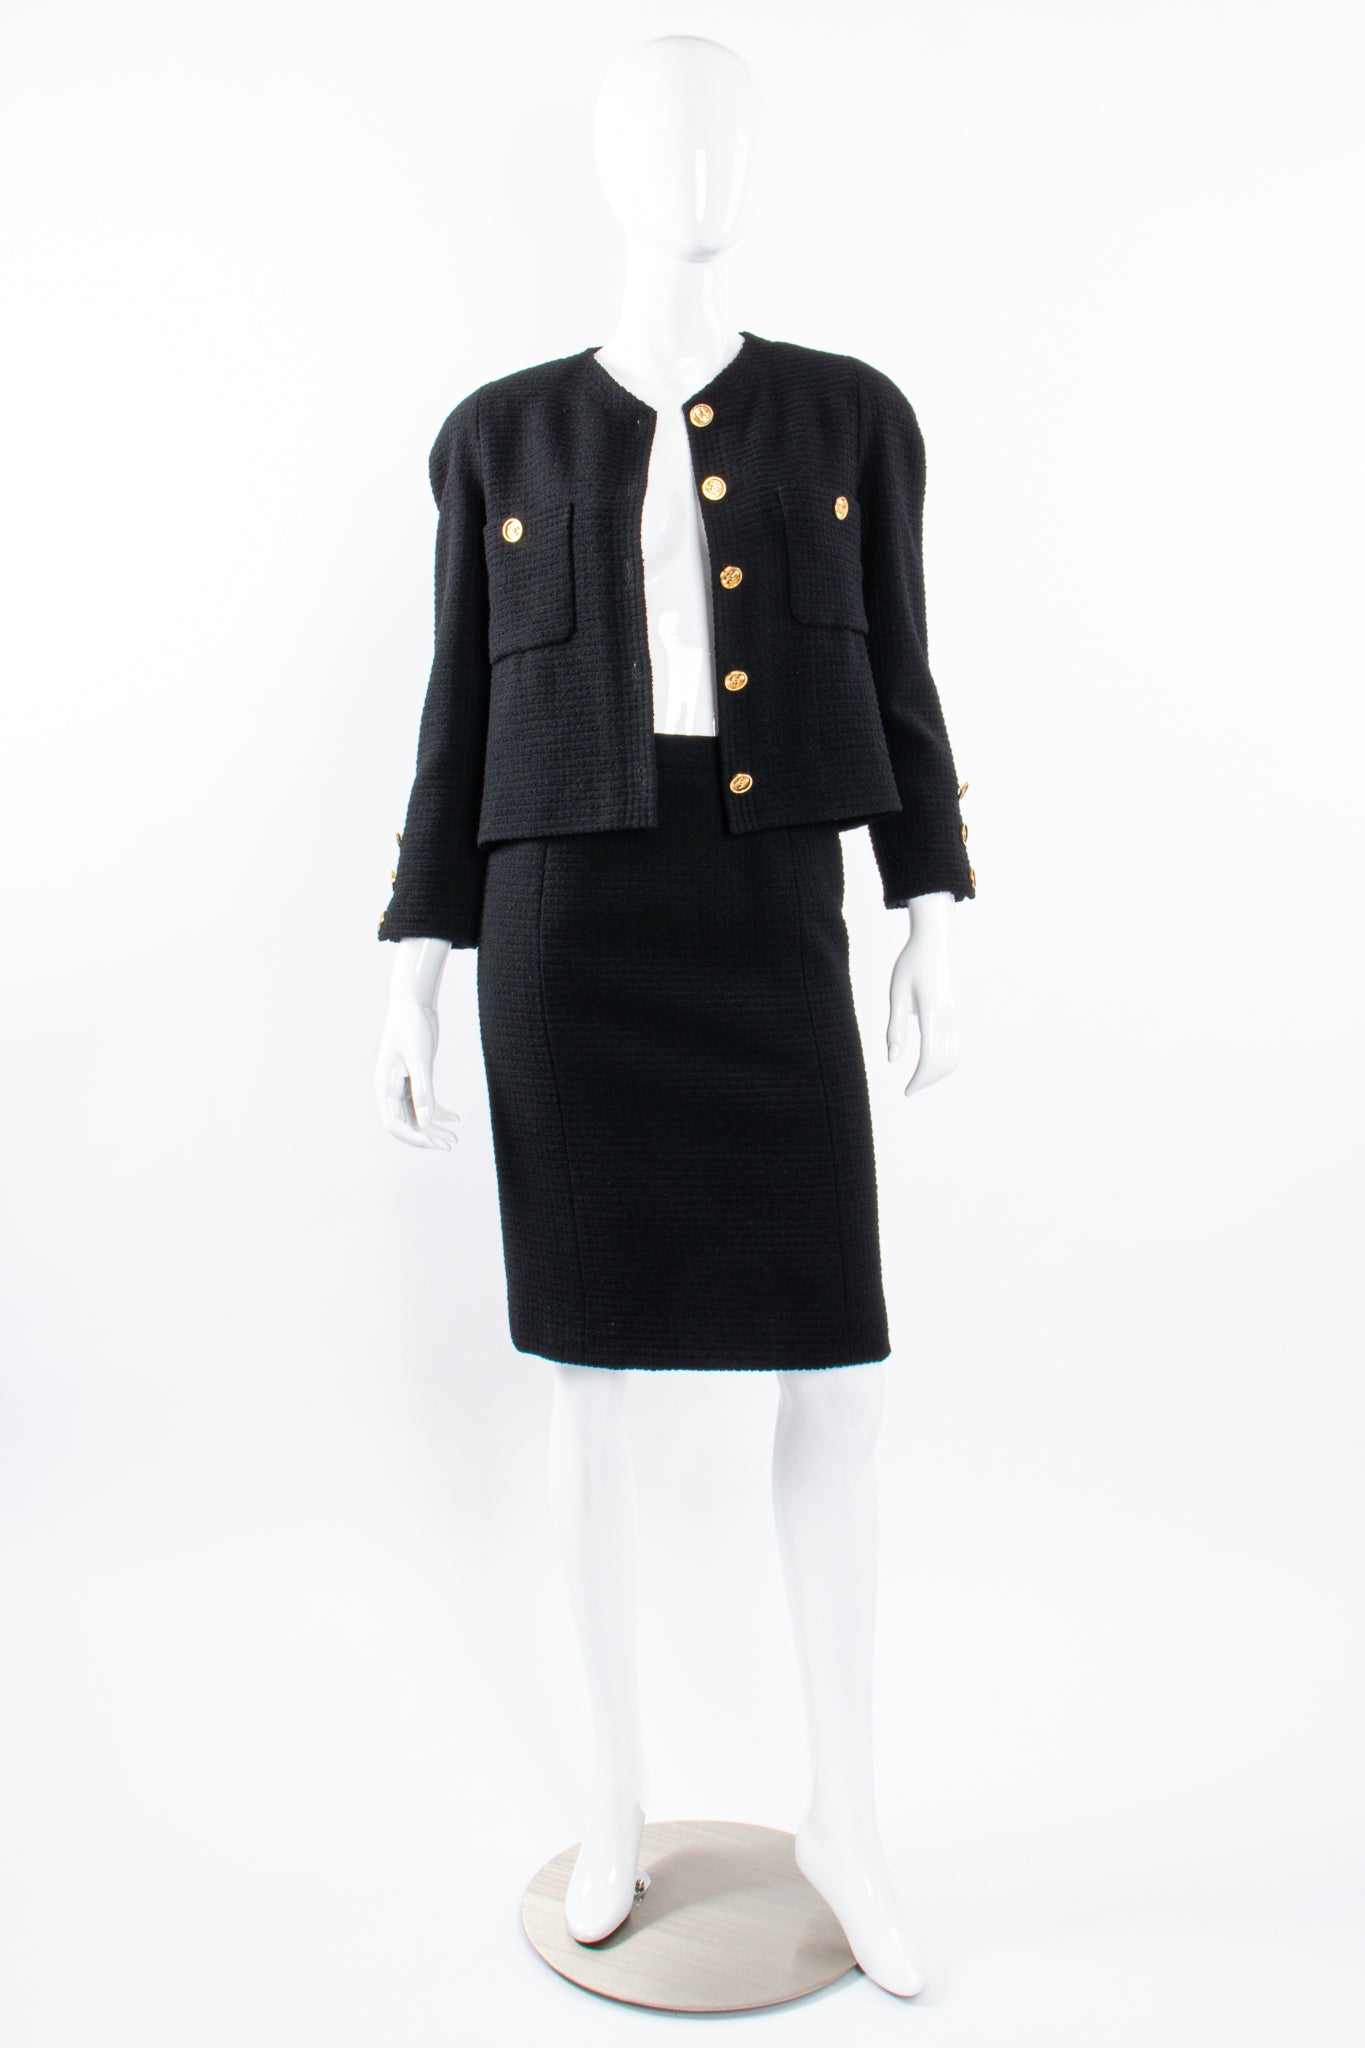 Vintage Chanel Classic Monochrome Tweed Boxy Jacket and Skirt Set open on Mannequin at Recess LA